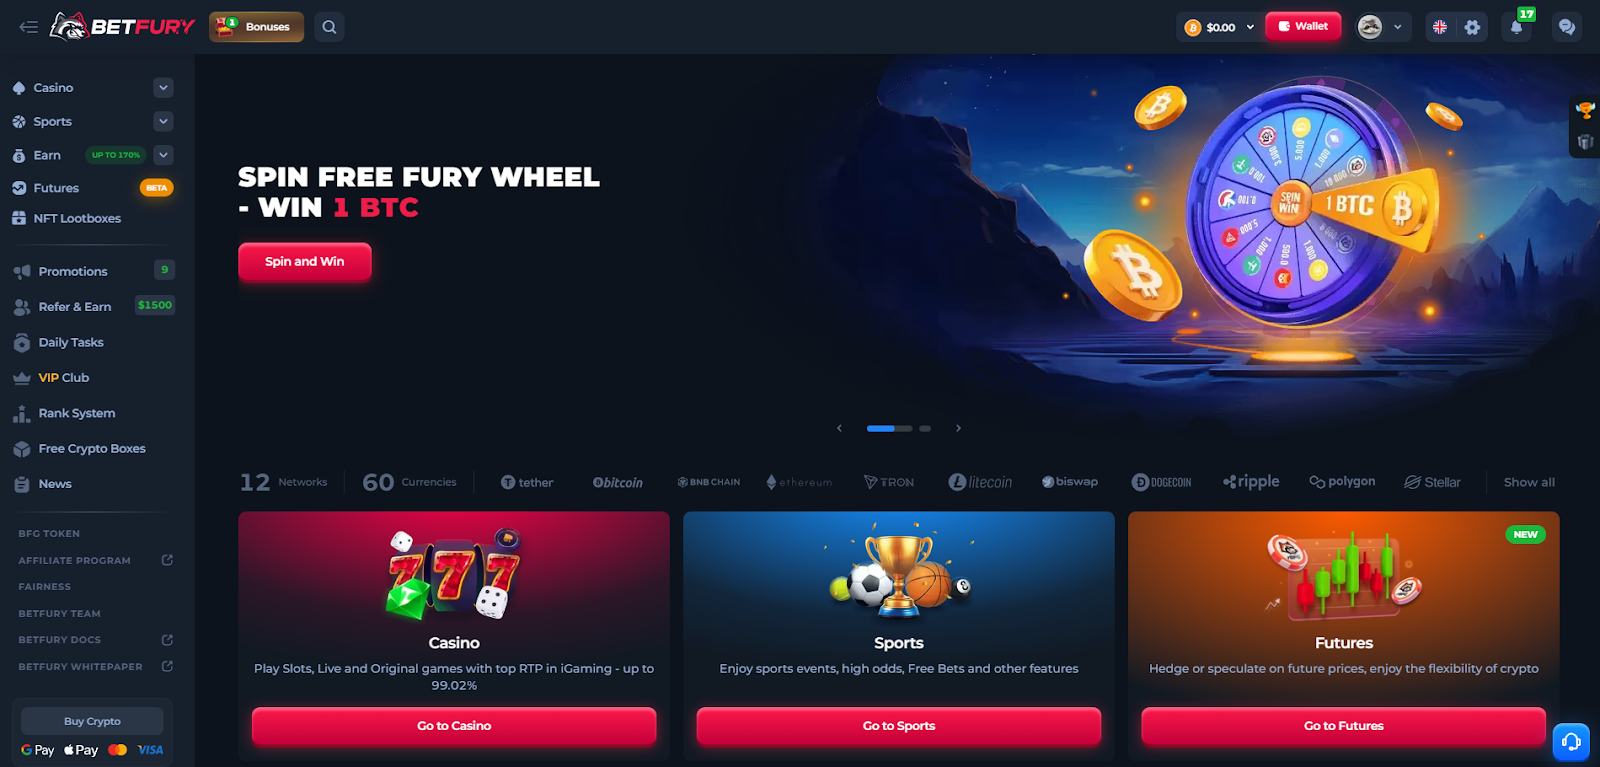 Betfury’s homepage and sidebar hold all the site’s crucial features